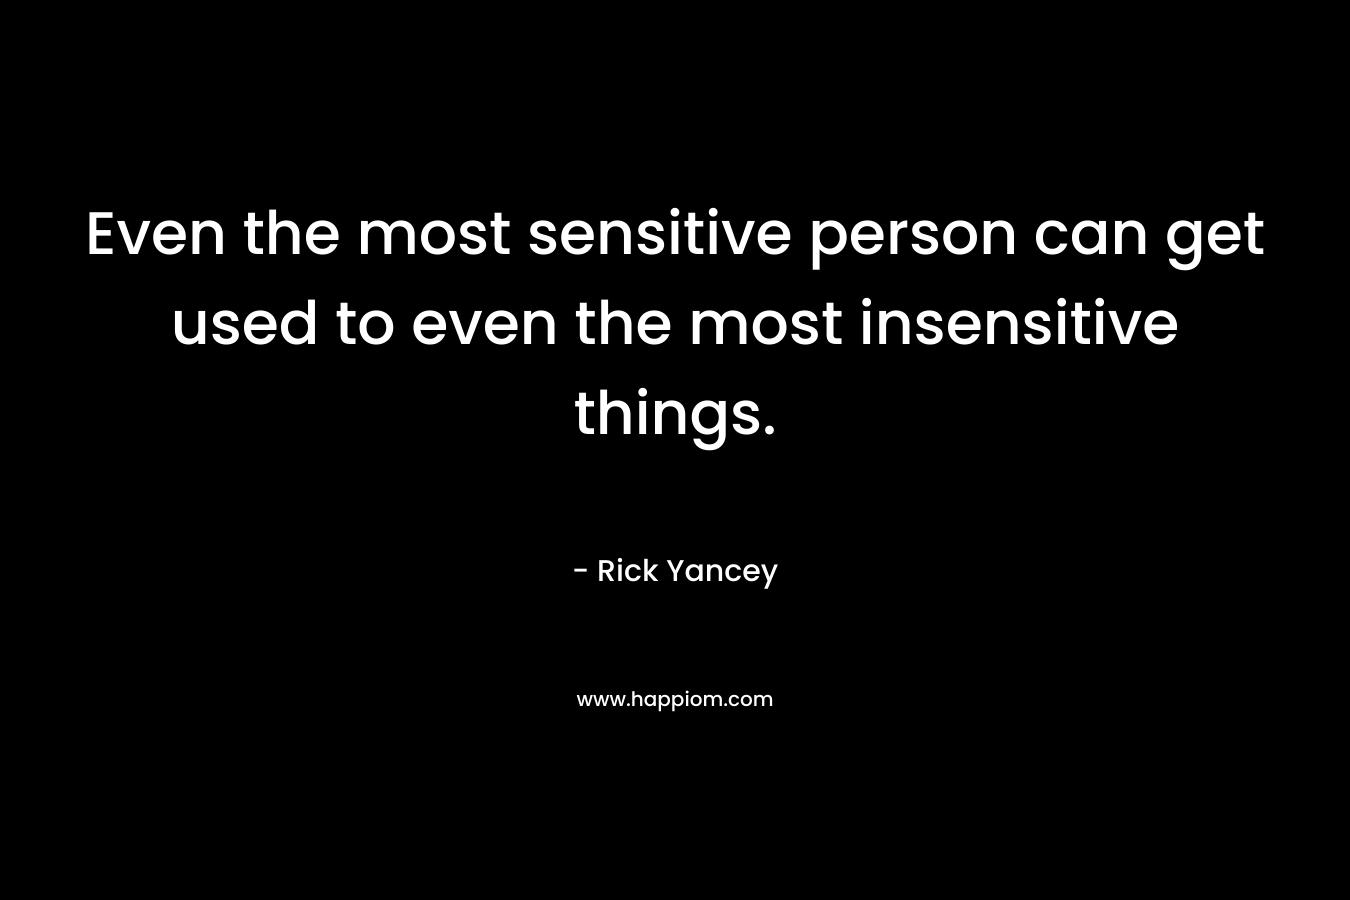 Even the most sensitive person can get used to even the most insensitive things. – Rick Yancey